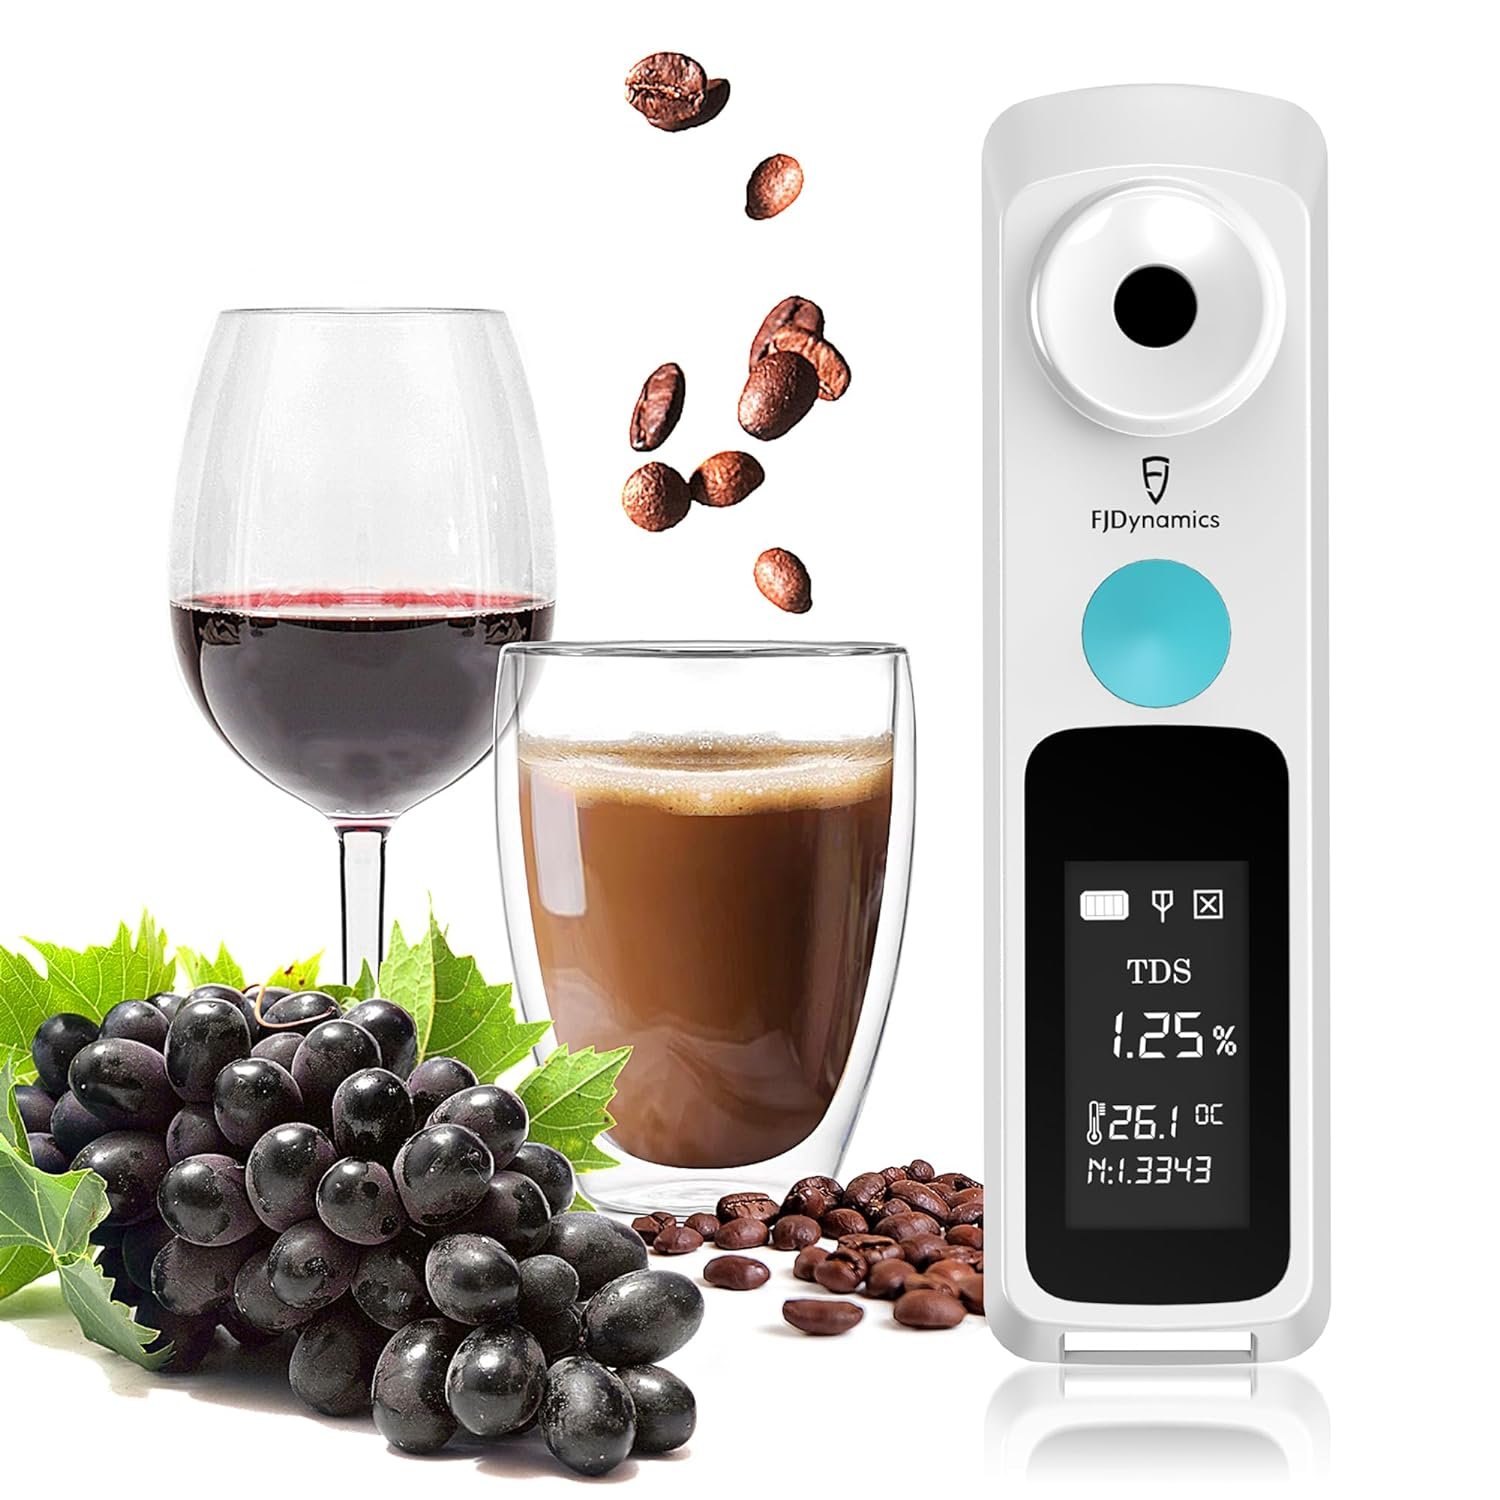 fjdynamics digital smart brix refractometer for coffee tds 0 55 with app 01 high precision easy to usereadcalibrate for